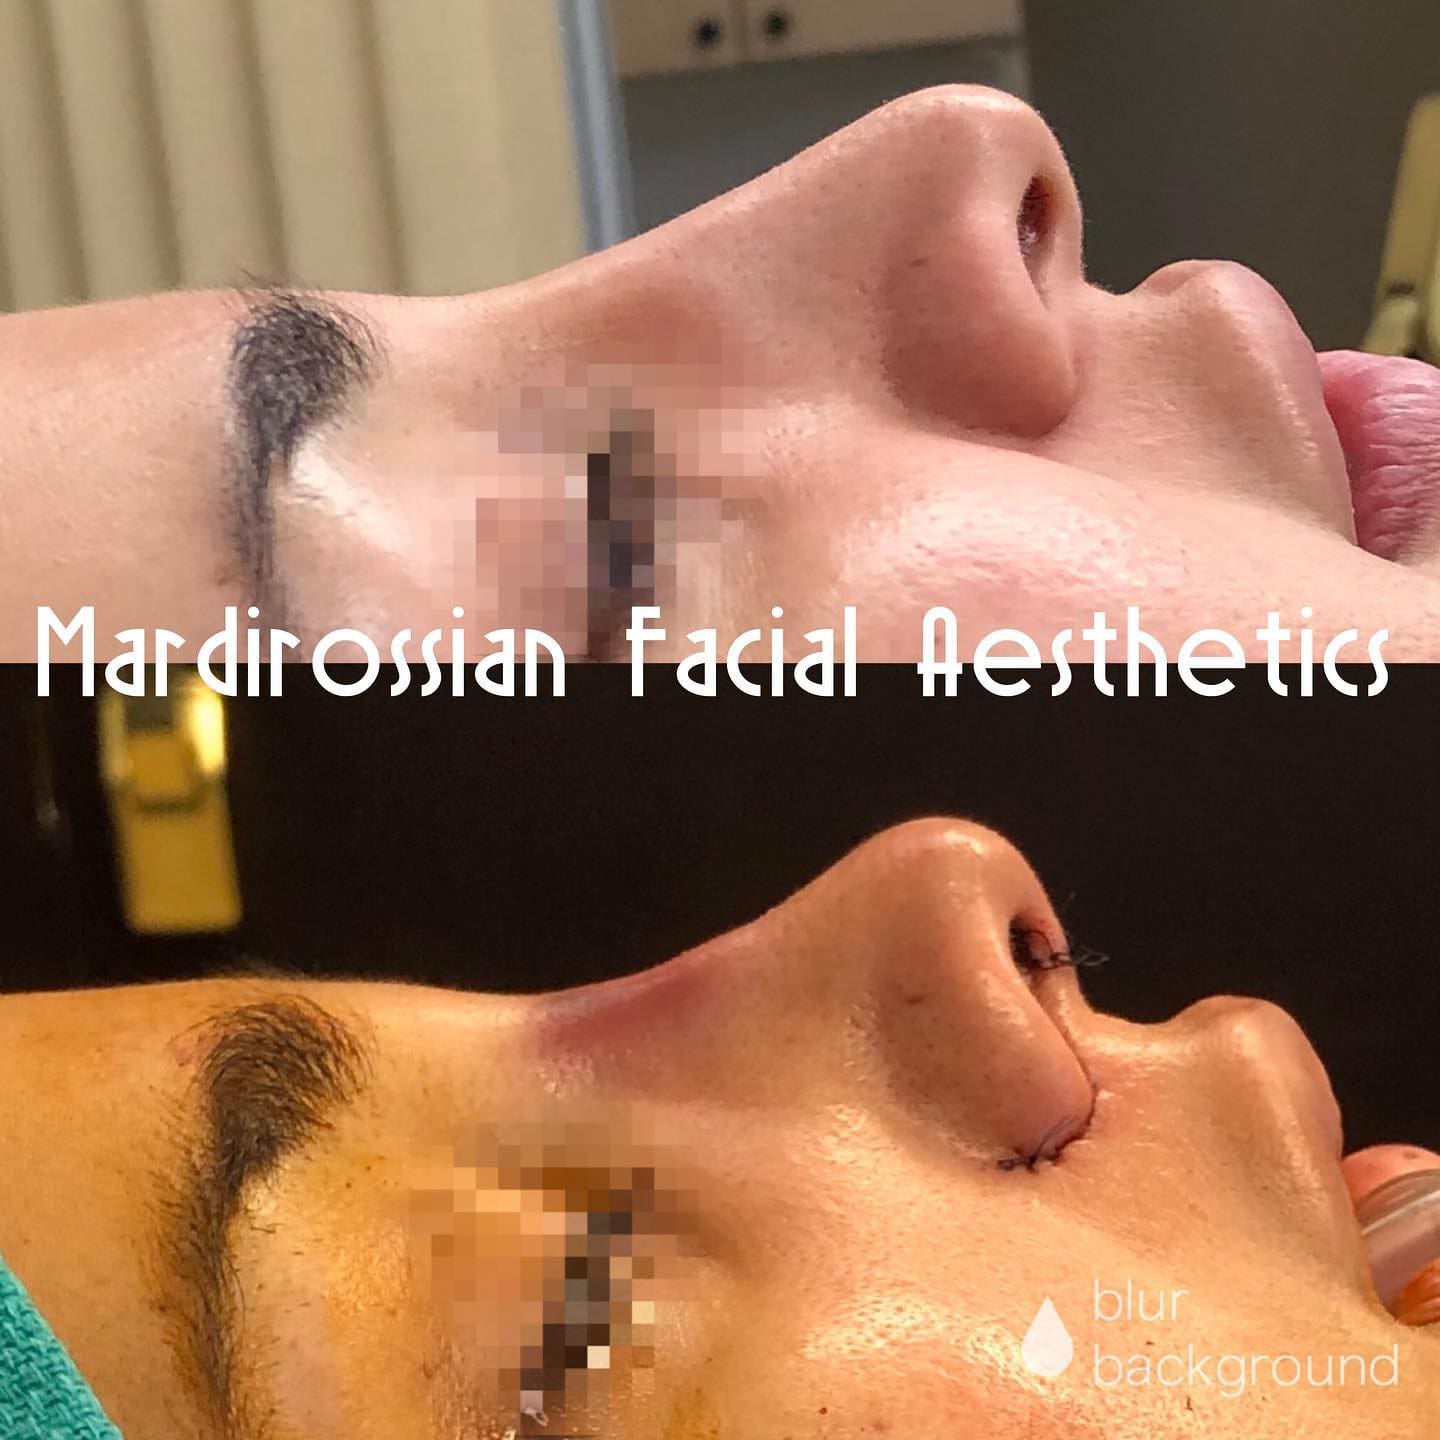 Rhinoplasty Before and After Pictures McLean, VA